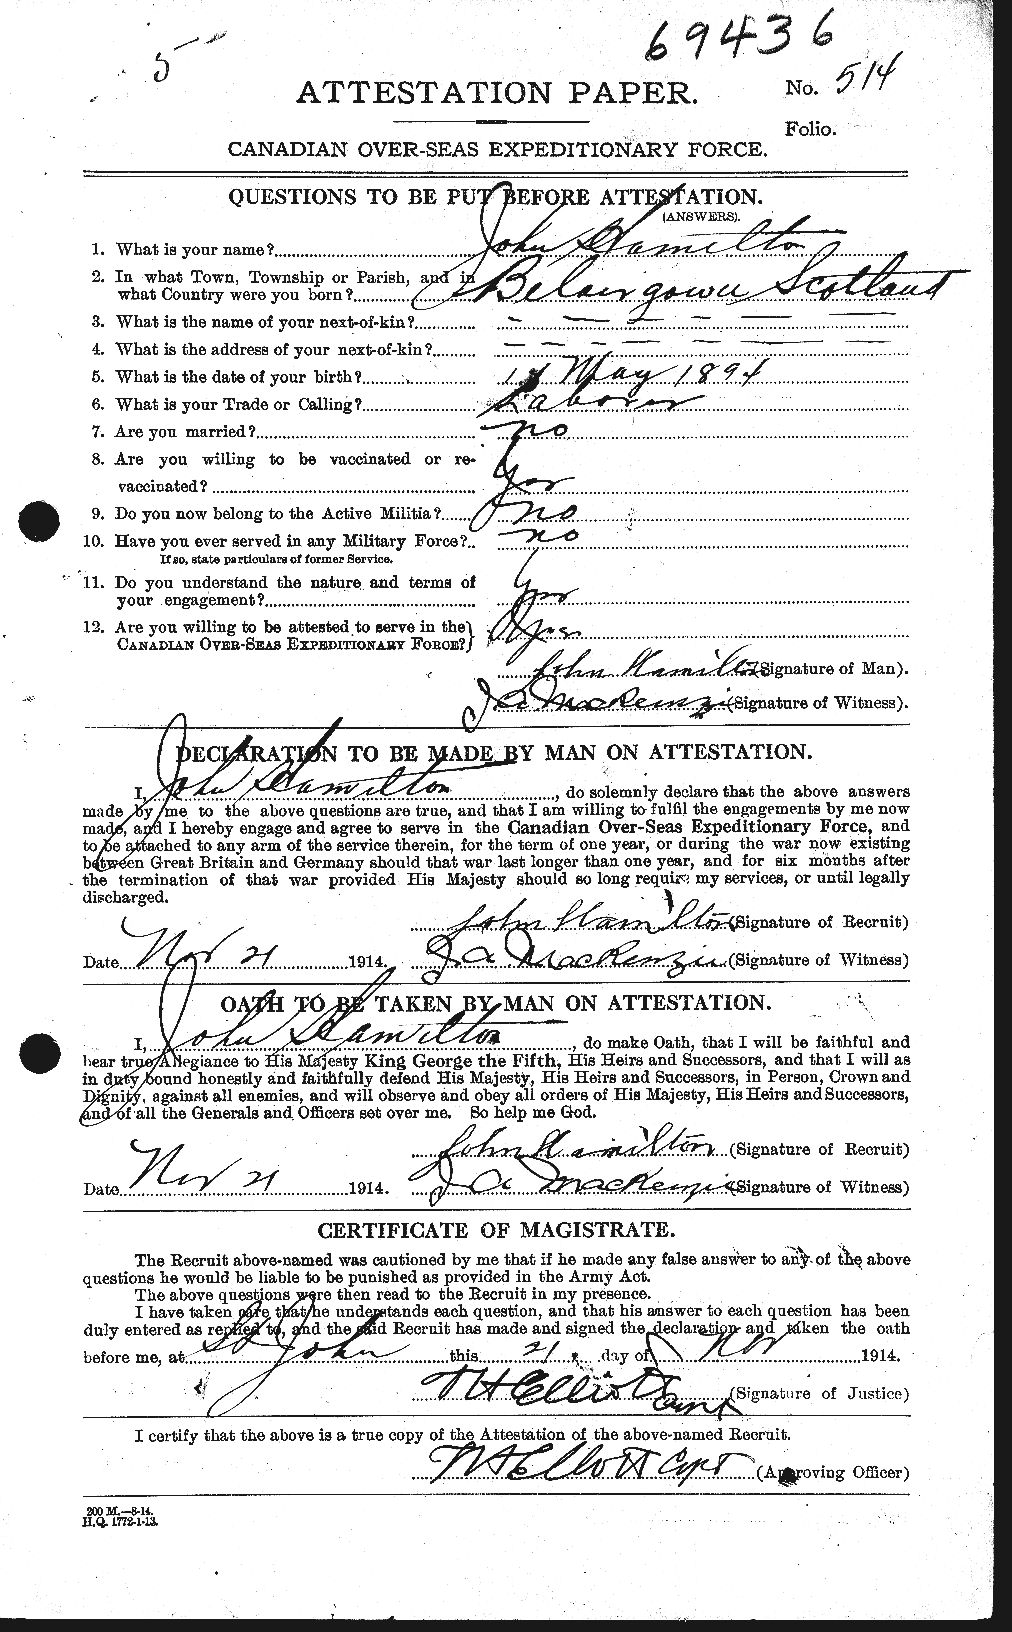 Personnel Records of the First World War - CEF 373027a